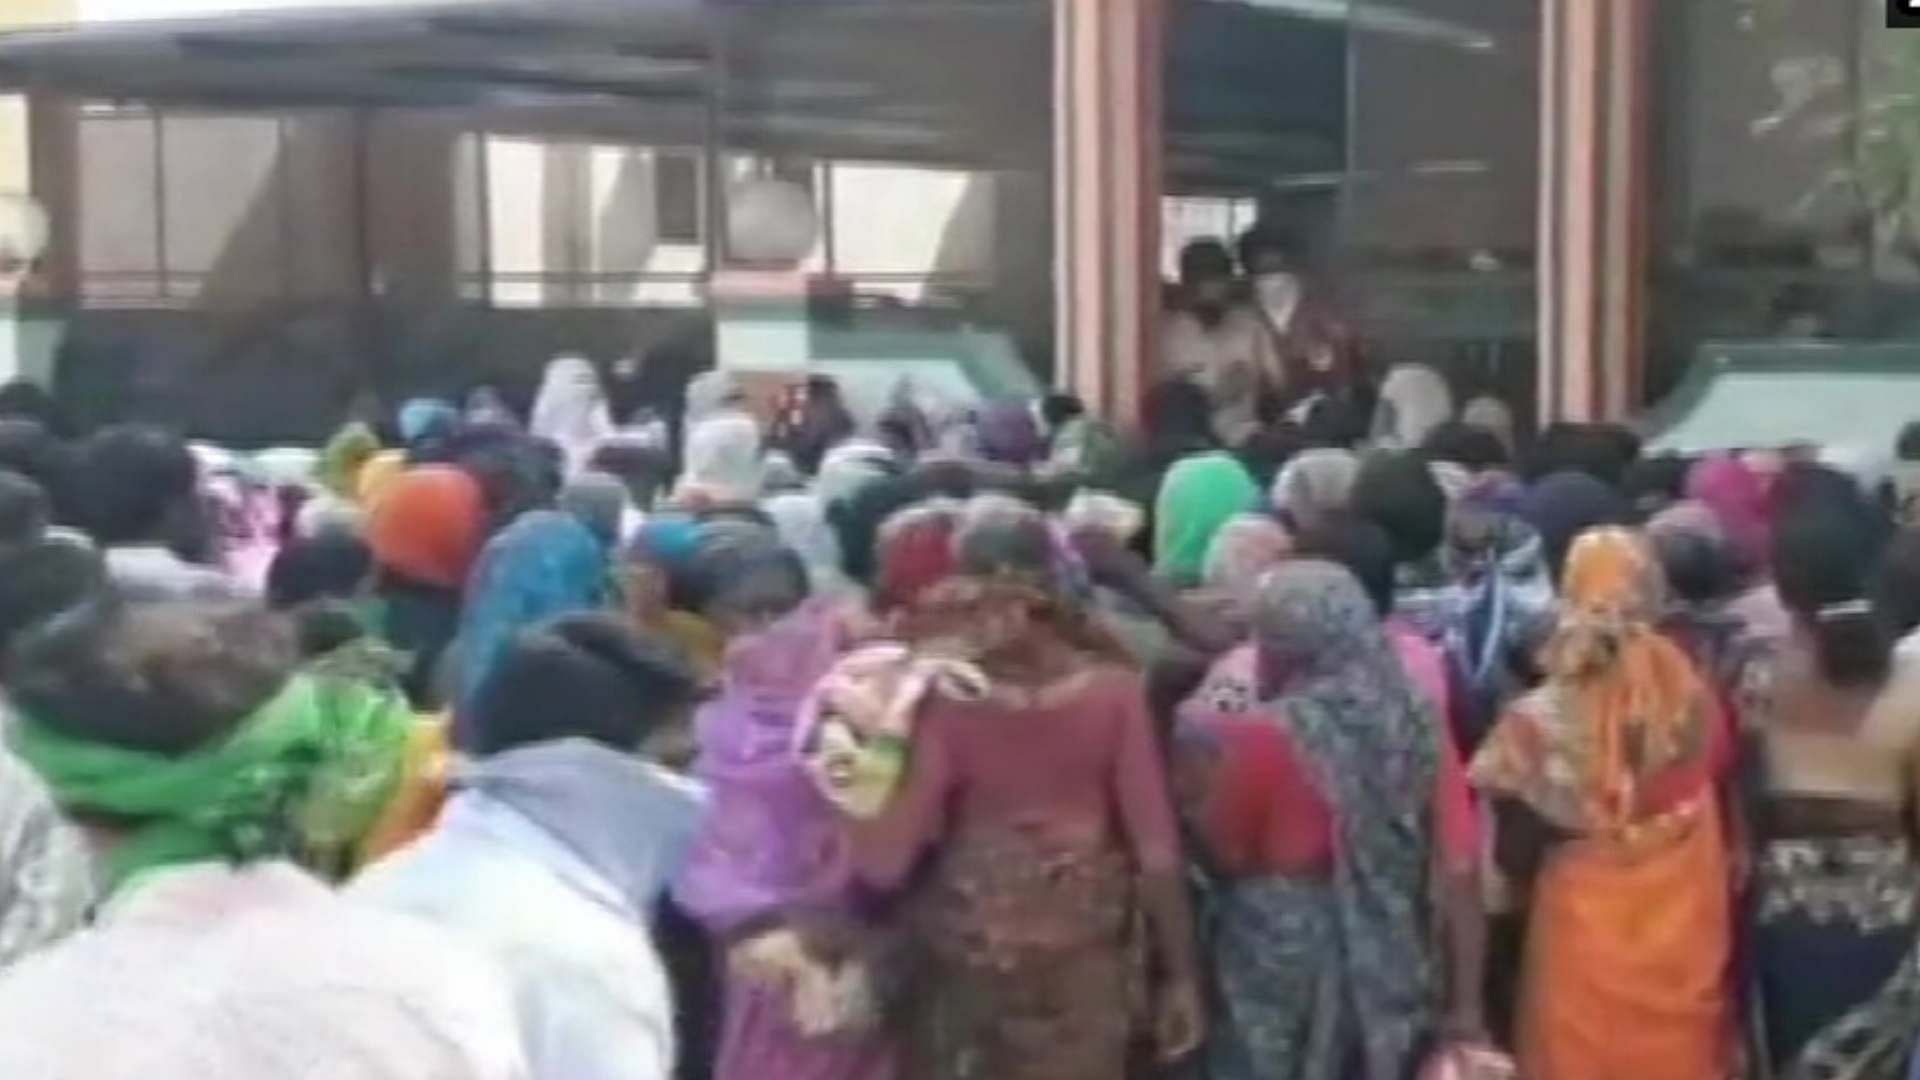 People gather outside an MLA’s house in Maharashtra to collect ration.